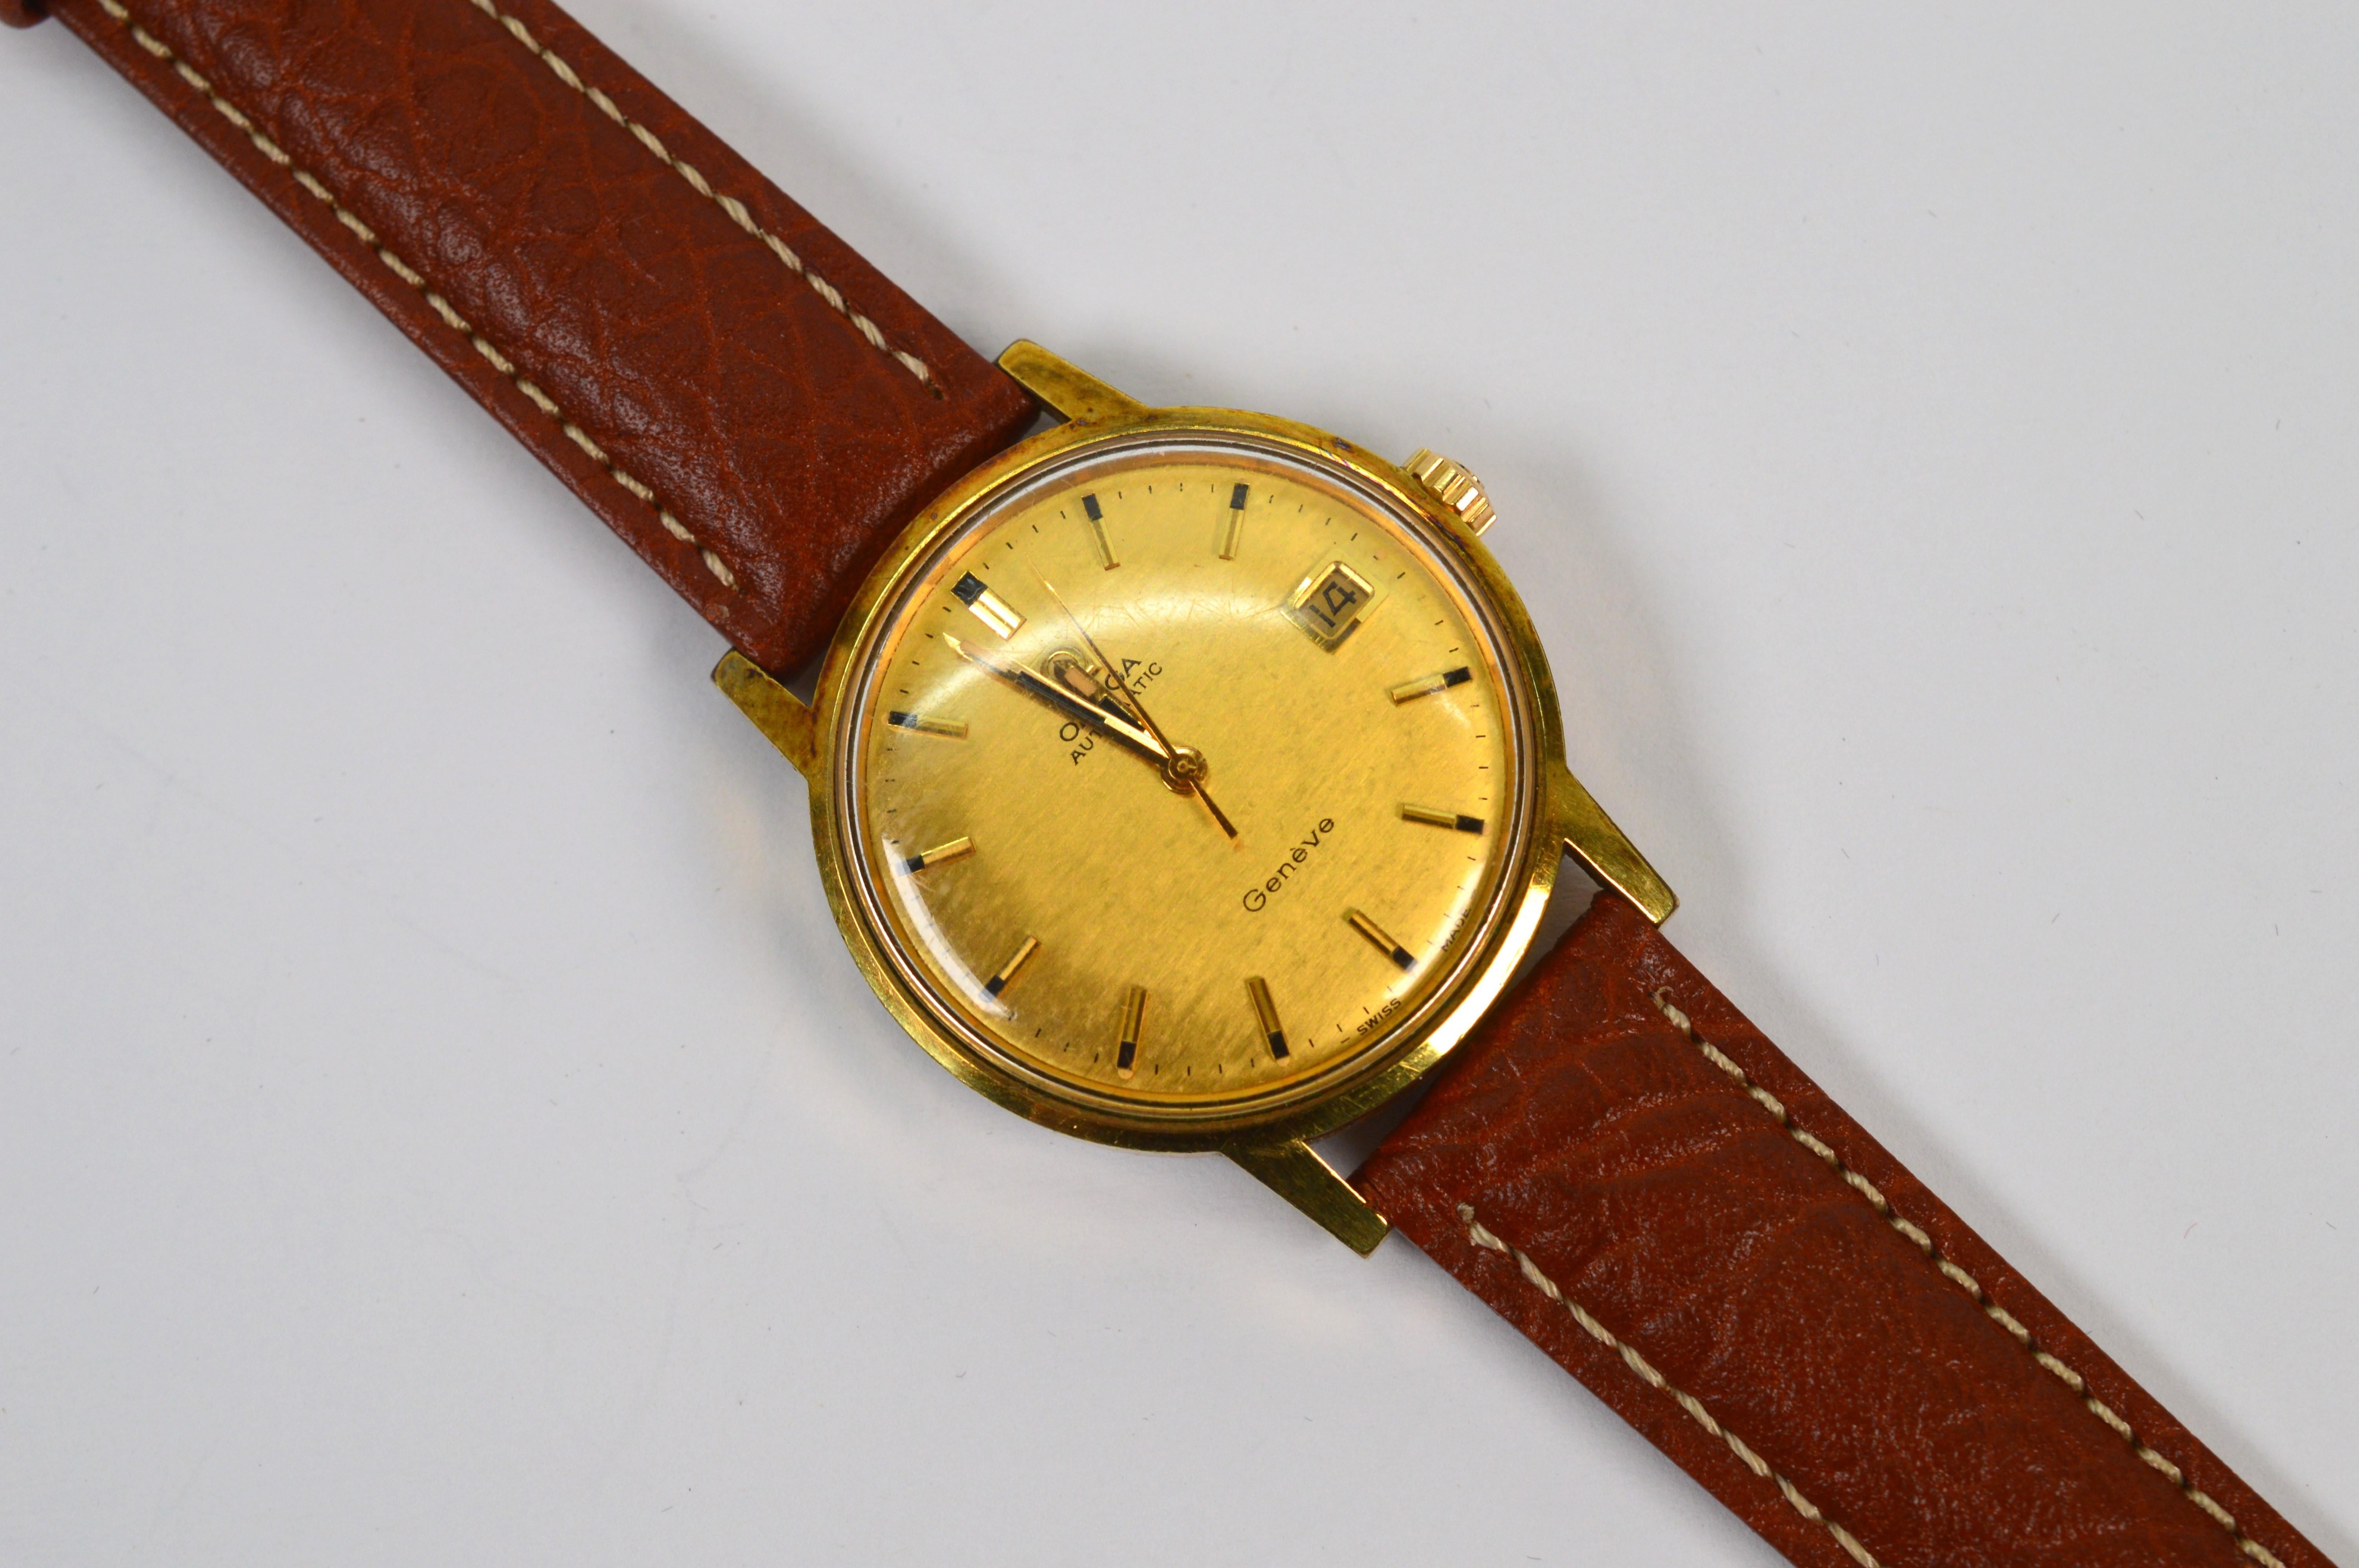 Omega 565 Steel Men's Wrist Watch with Date In Good Condition For Sale In Mount Kisco, NY